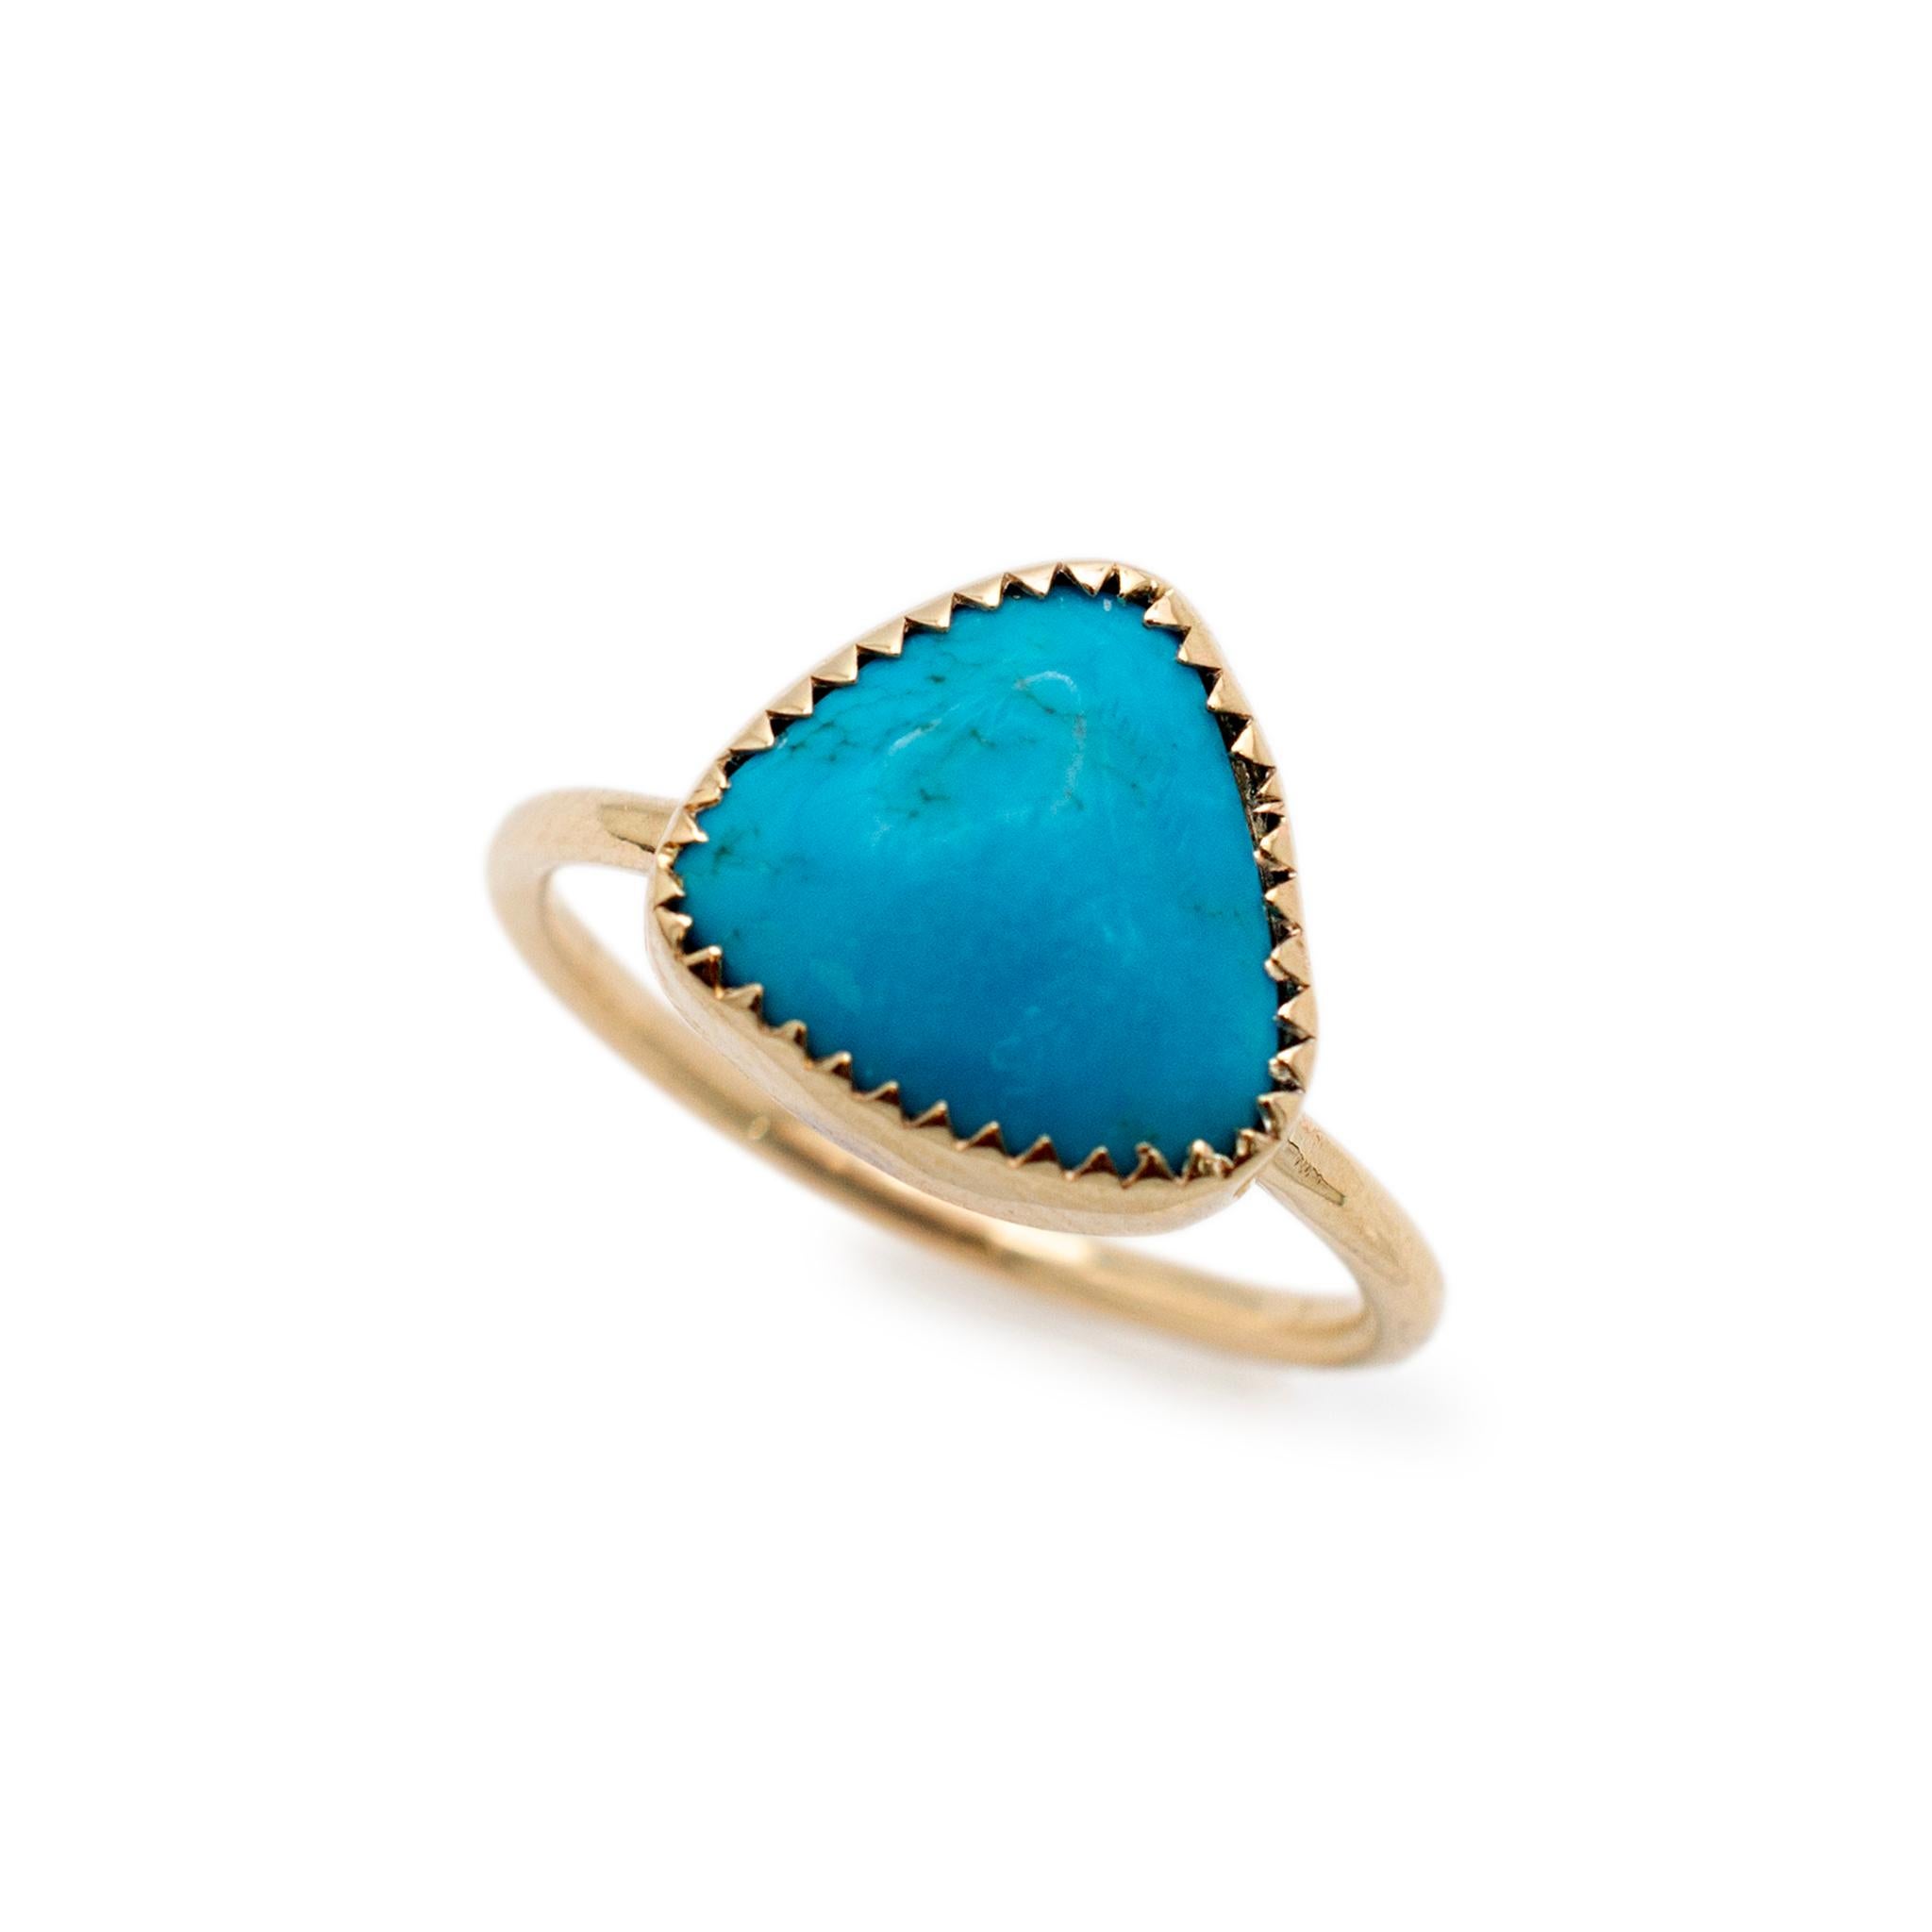 Gender: Ladies

Metal Type: 14K Rose Gold

Size: 6.5

Head Measurements: 11.70mm x 12.30mm

Shank Maximum Width: 1.55mm

Weight: 3.33 grams

One ladies  14K rose gold, turquoise cocktail ring with a half round shank. The metal was tested and